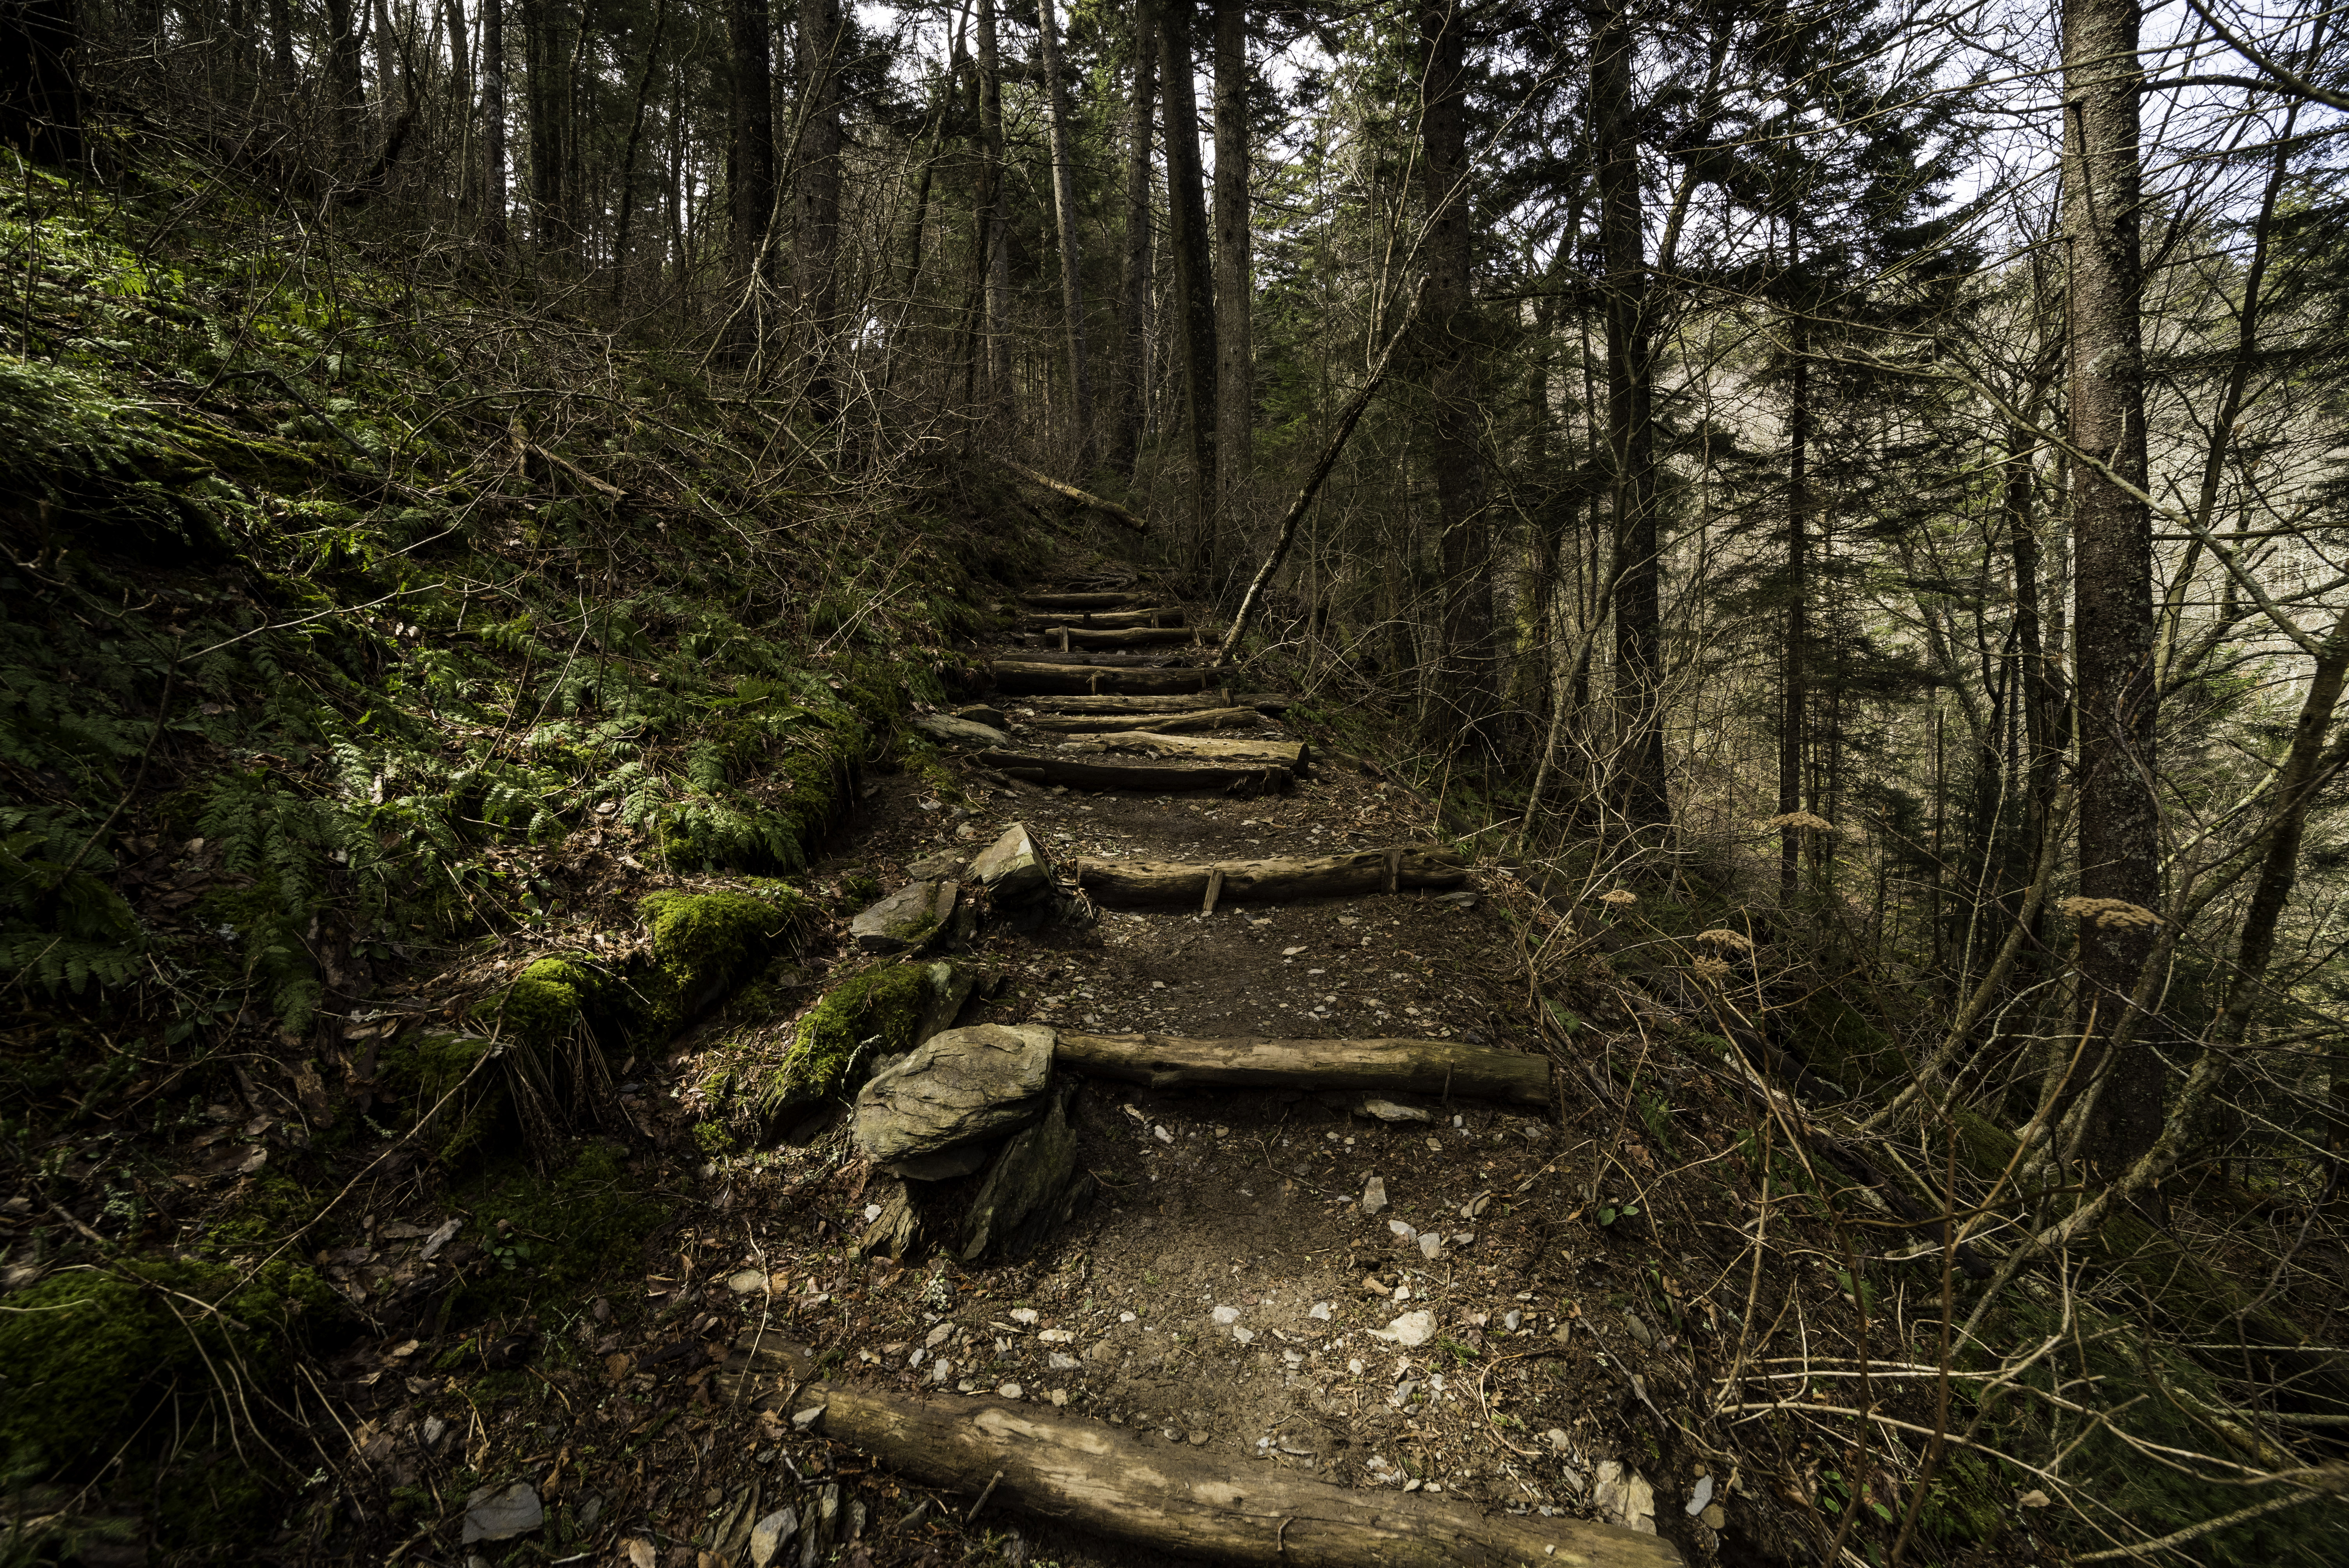 The Appalachian Trail is part of our National Trails System through the Smokey Mountains